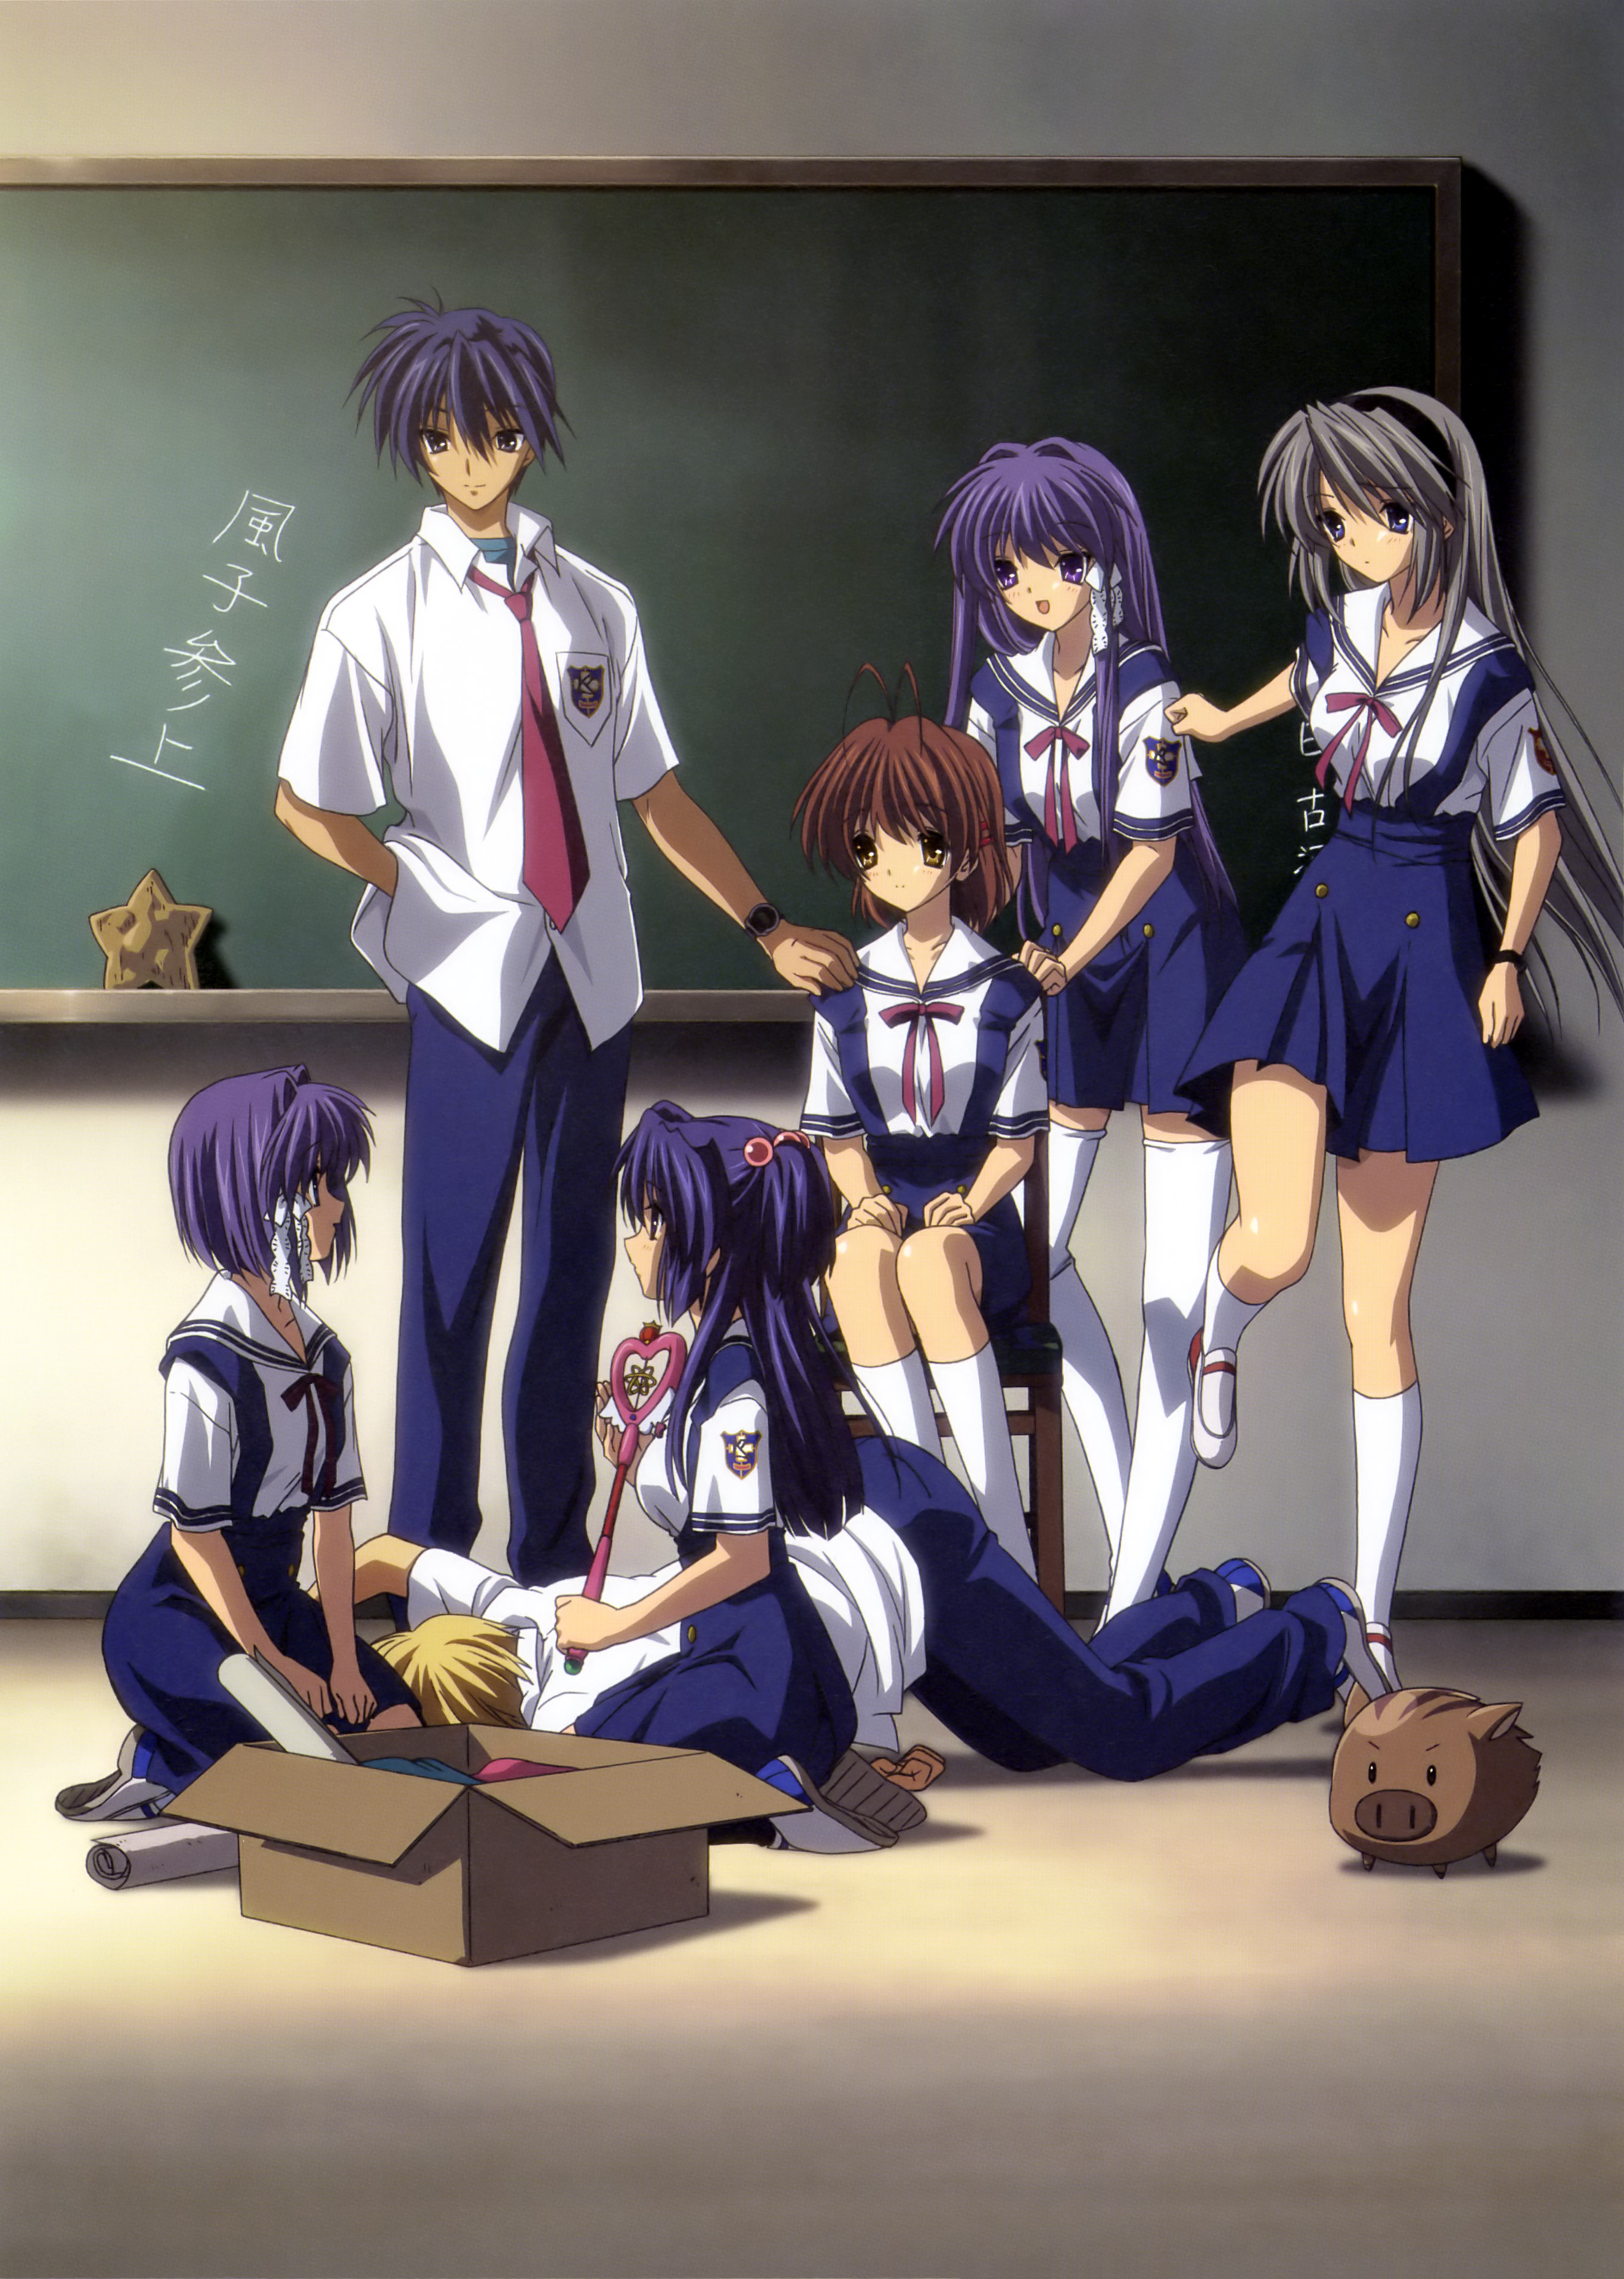 Clannad After Story Anime Review, by KingFaisal